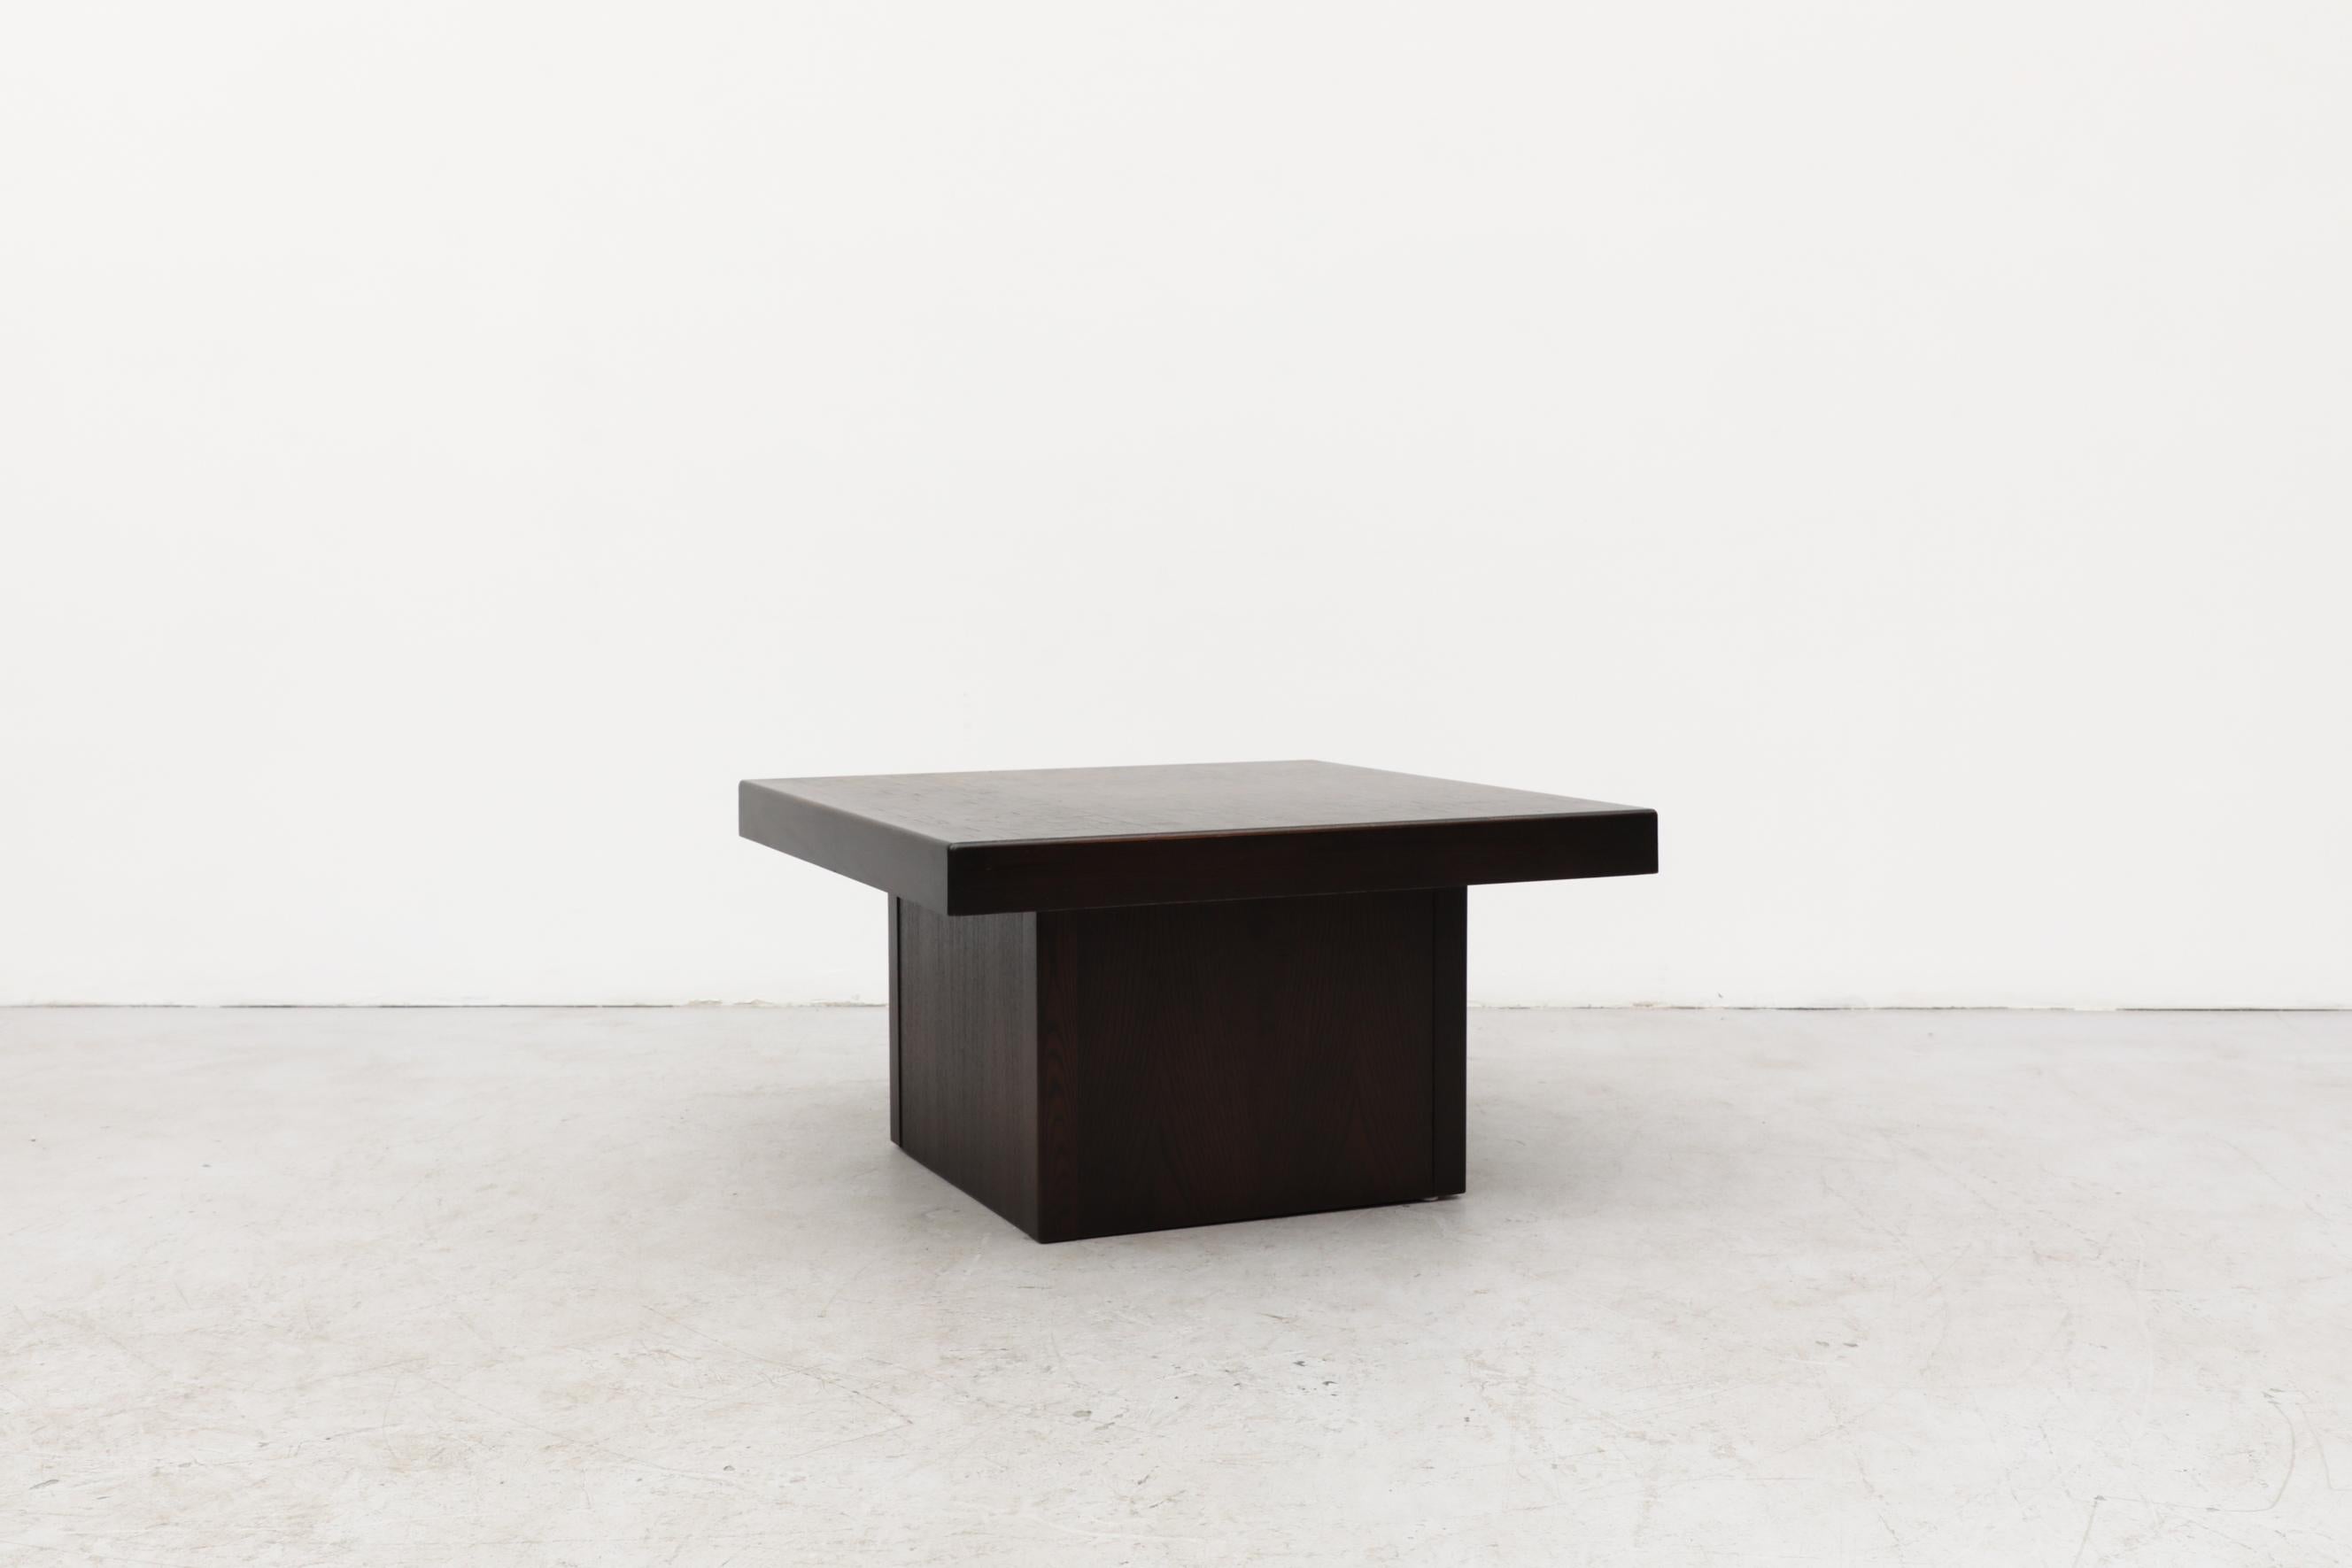 Impressive Brutalist coffee table with butcher block style top. The piece's strong lines make for a striking design.
In original condition with wear consistent with its age and use. Other coffee tables are available and listed separately